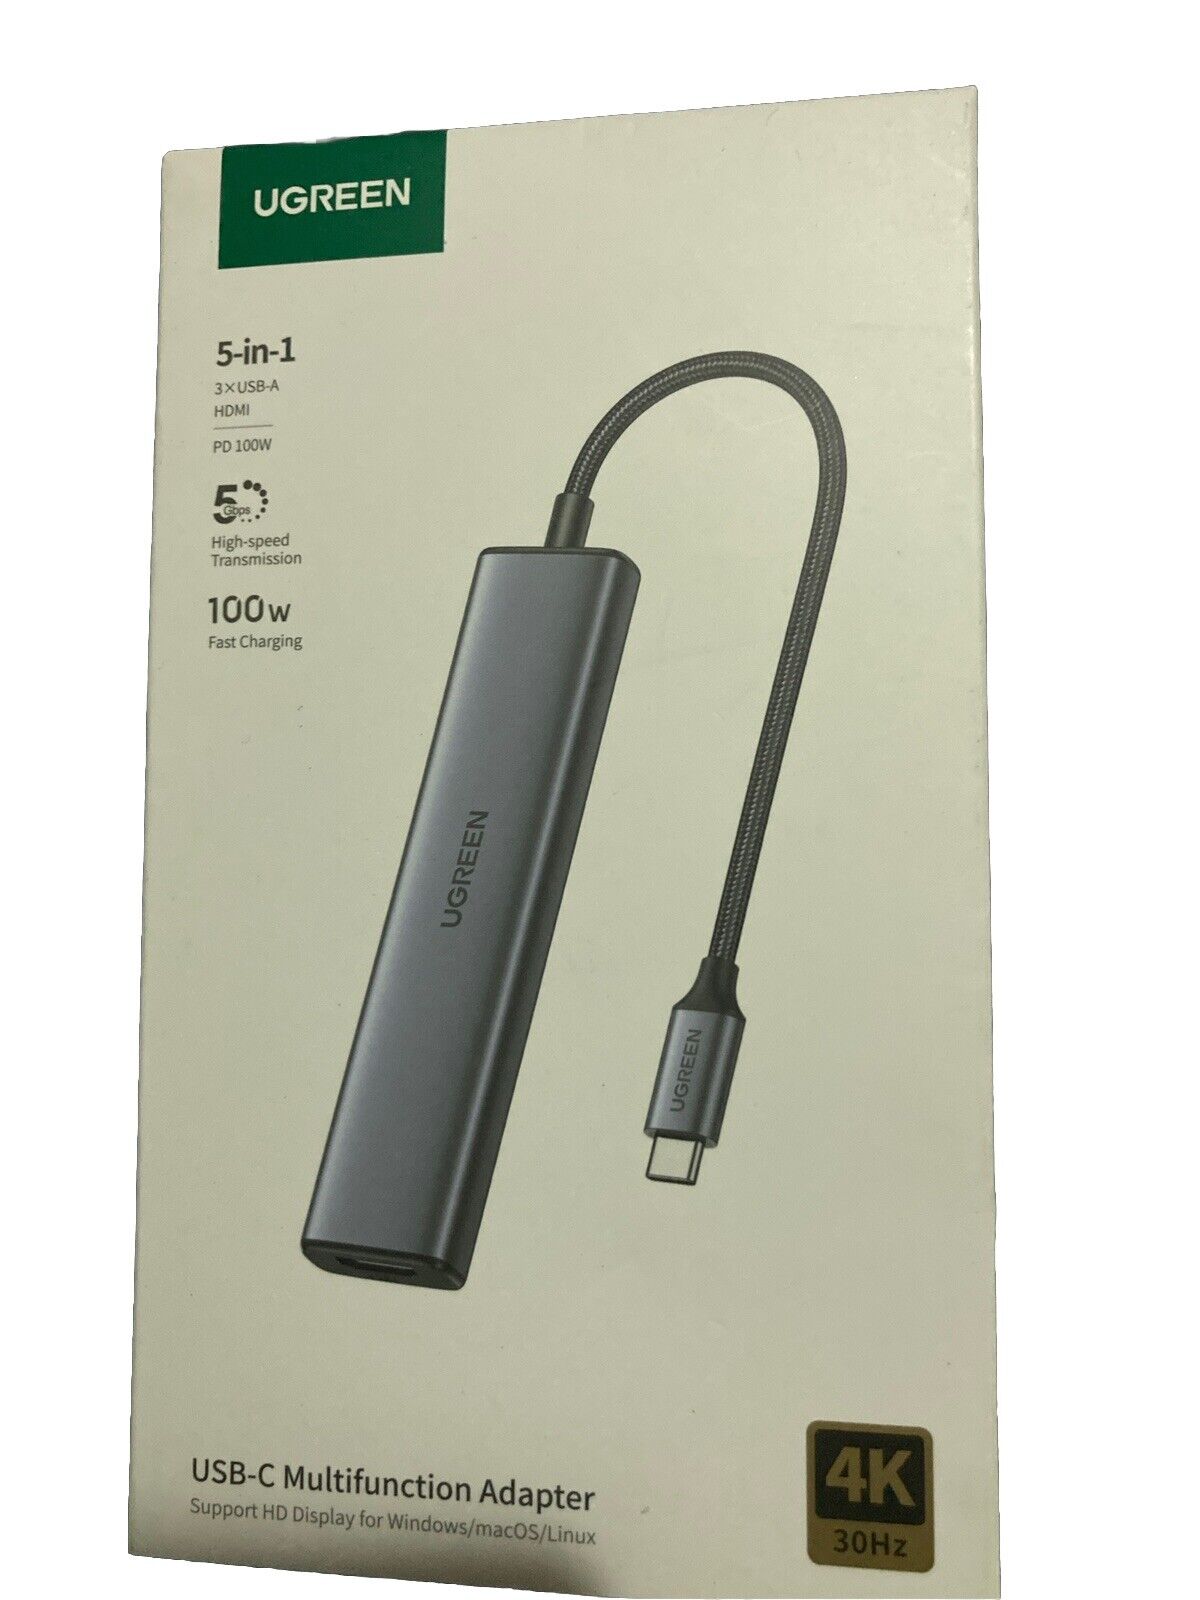 UGreen 5-in-1 Multifunction USB-C Adapter - USB-A and HDMI